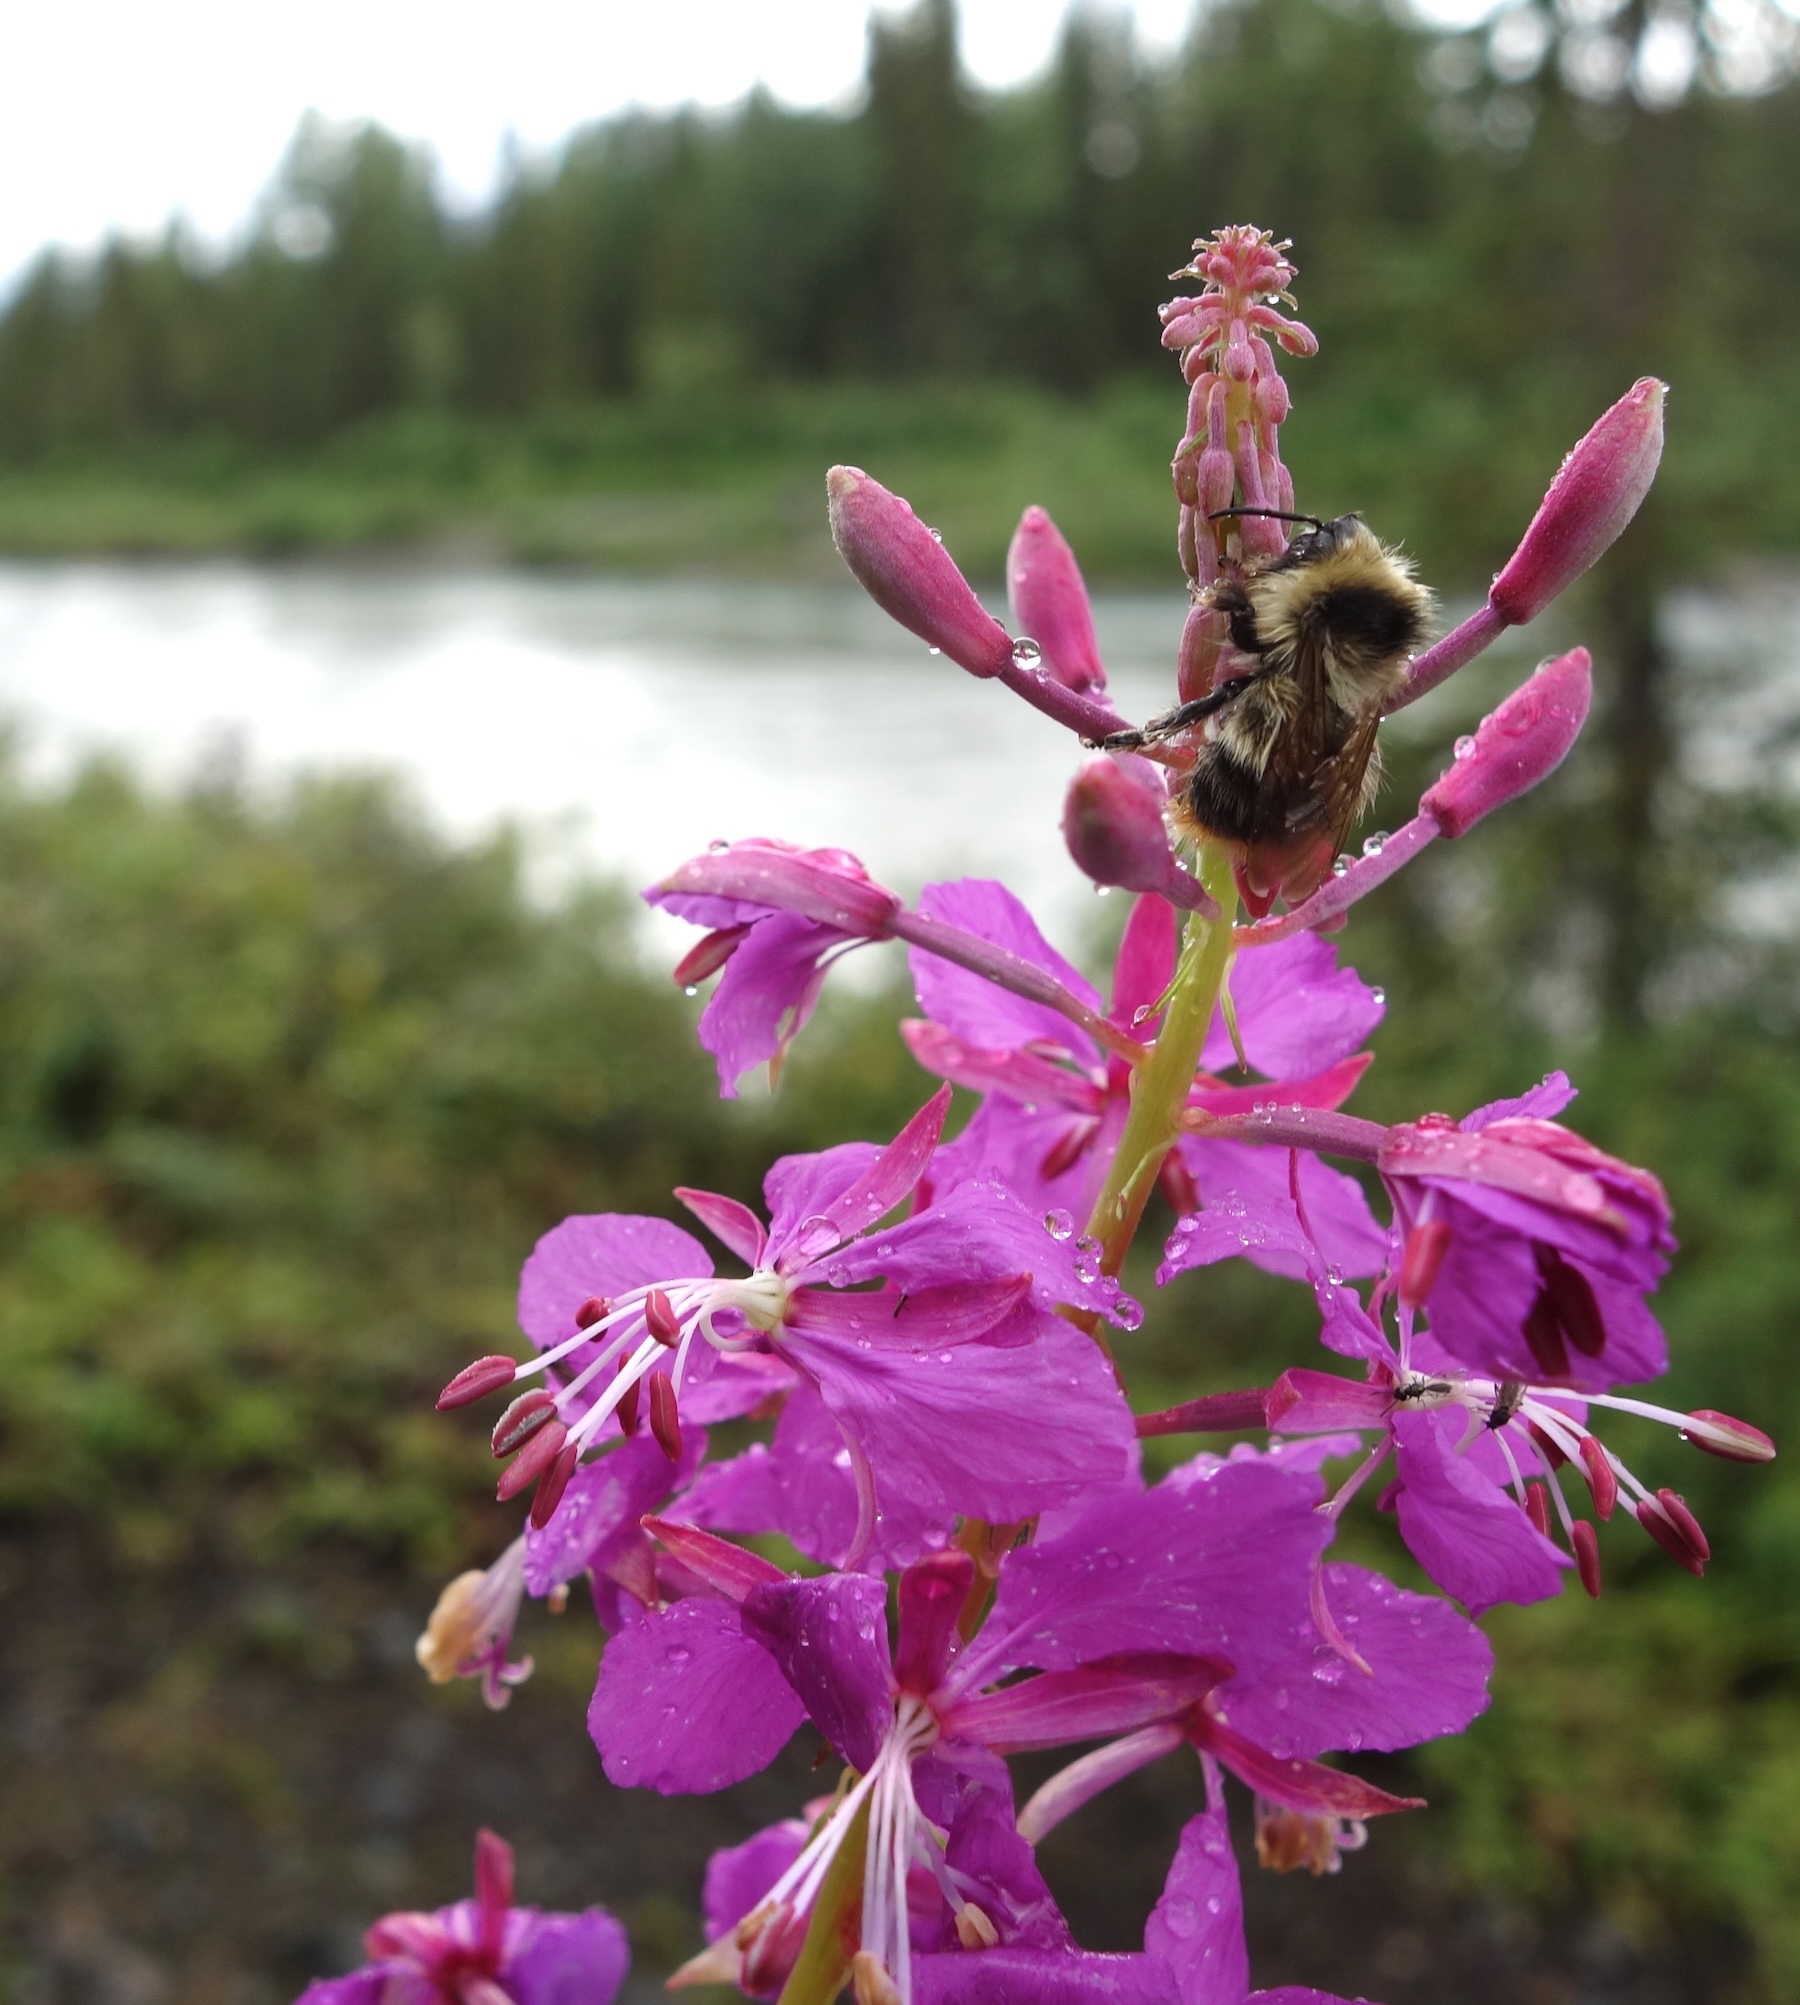 A bumblebee sits near the peak of a raceme of water-beaded pink flowers atop a fireweed plant.